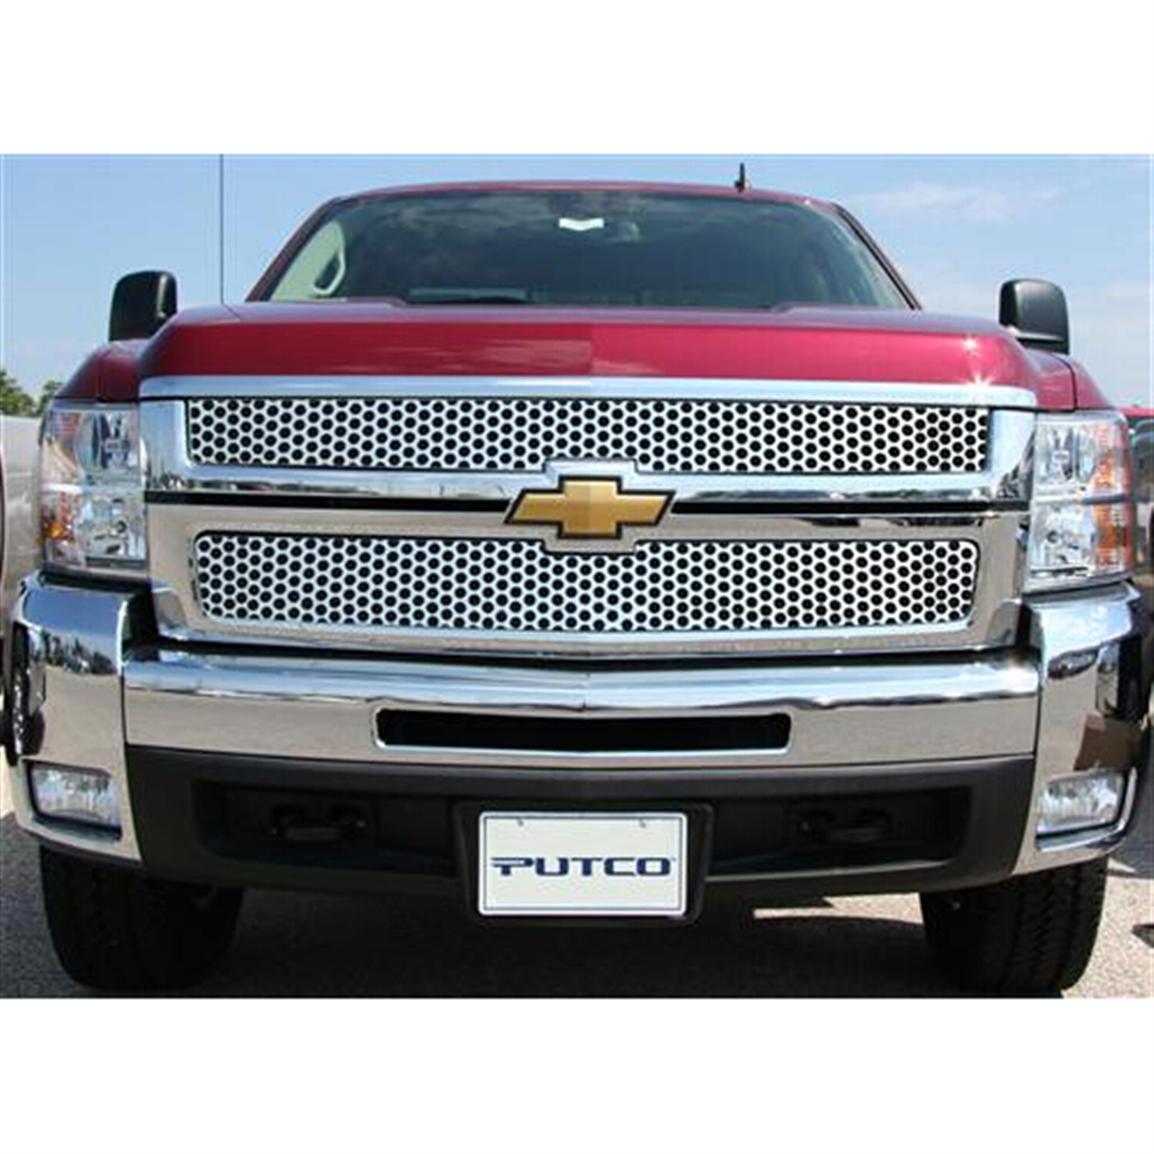 Grill for gmc truck #2